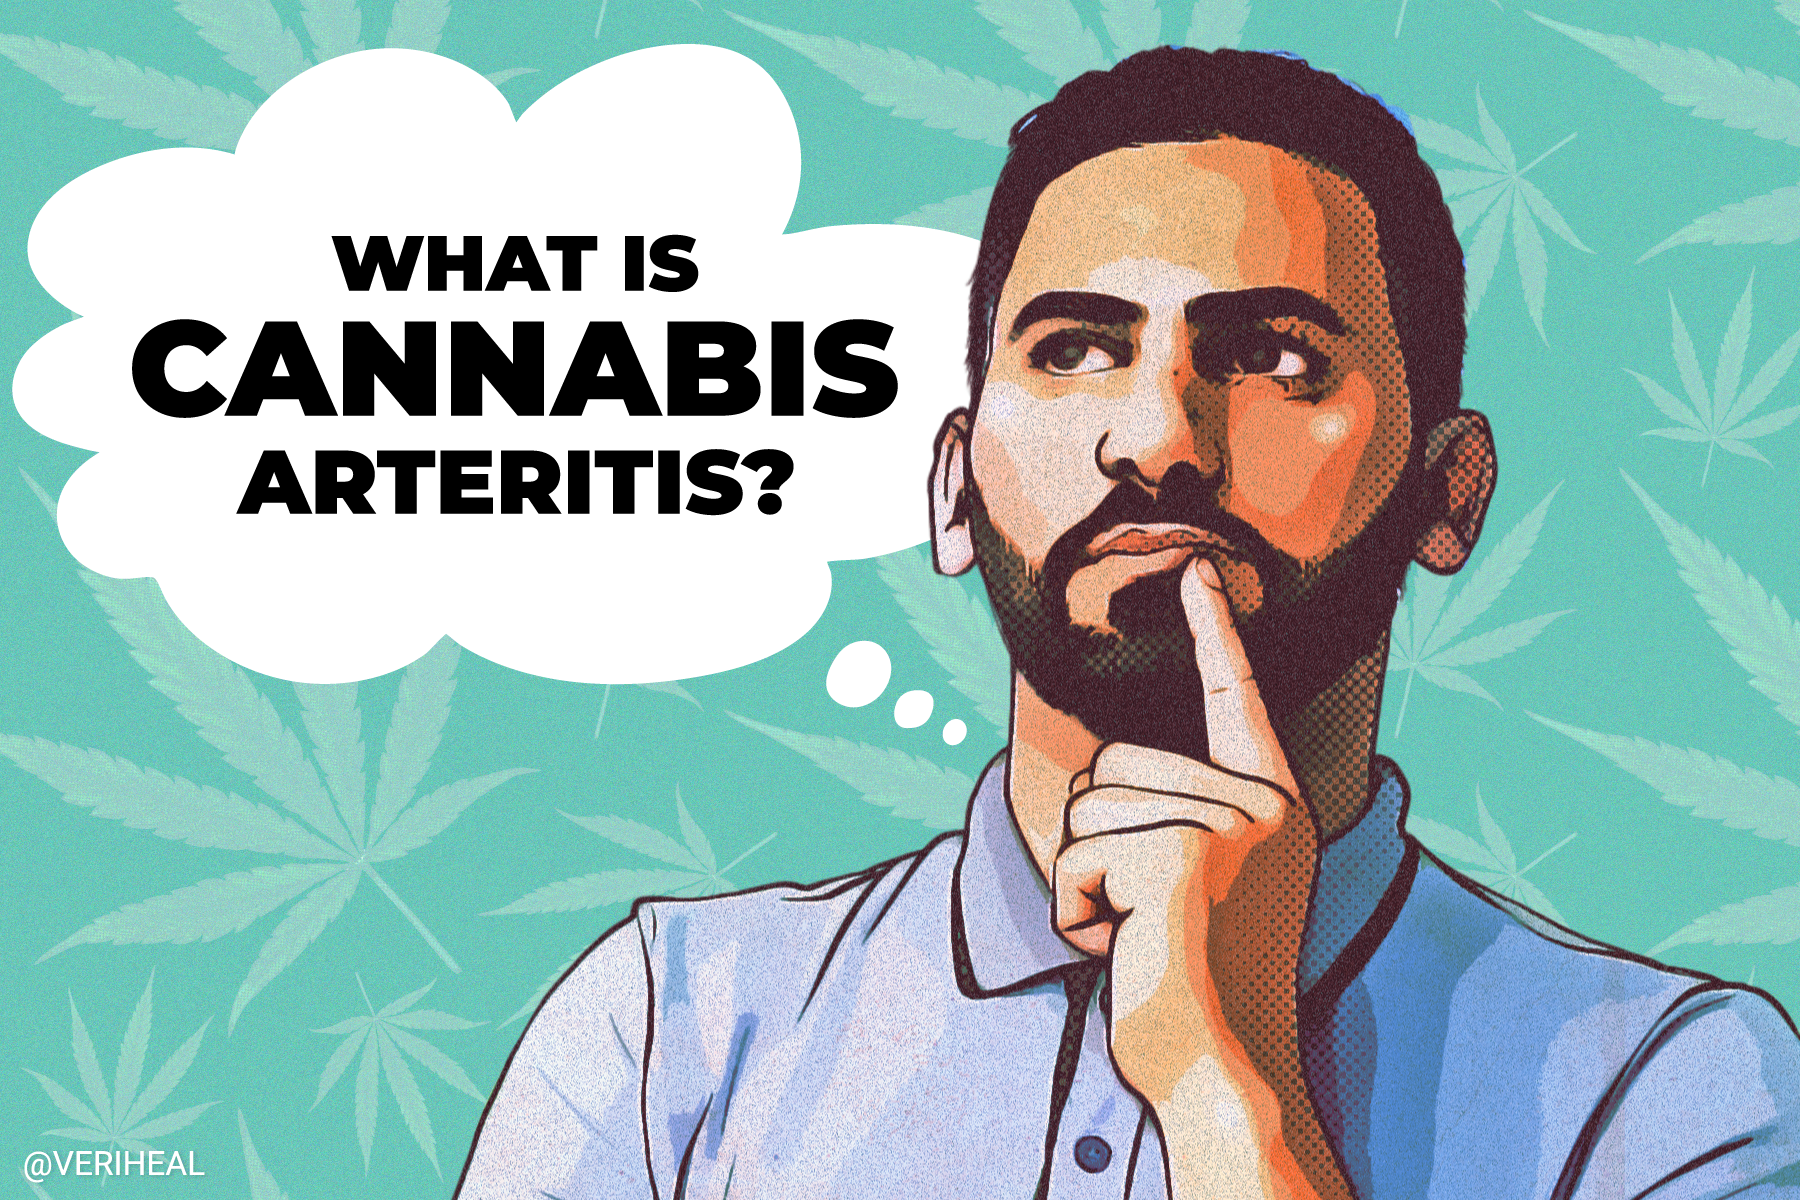 What Is Cannabis Arteritis—and Should Consumers Be Worried?